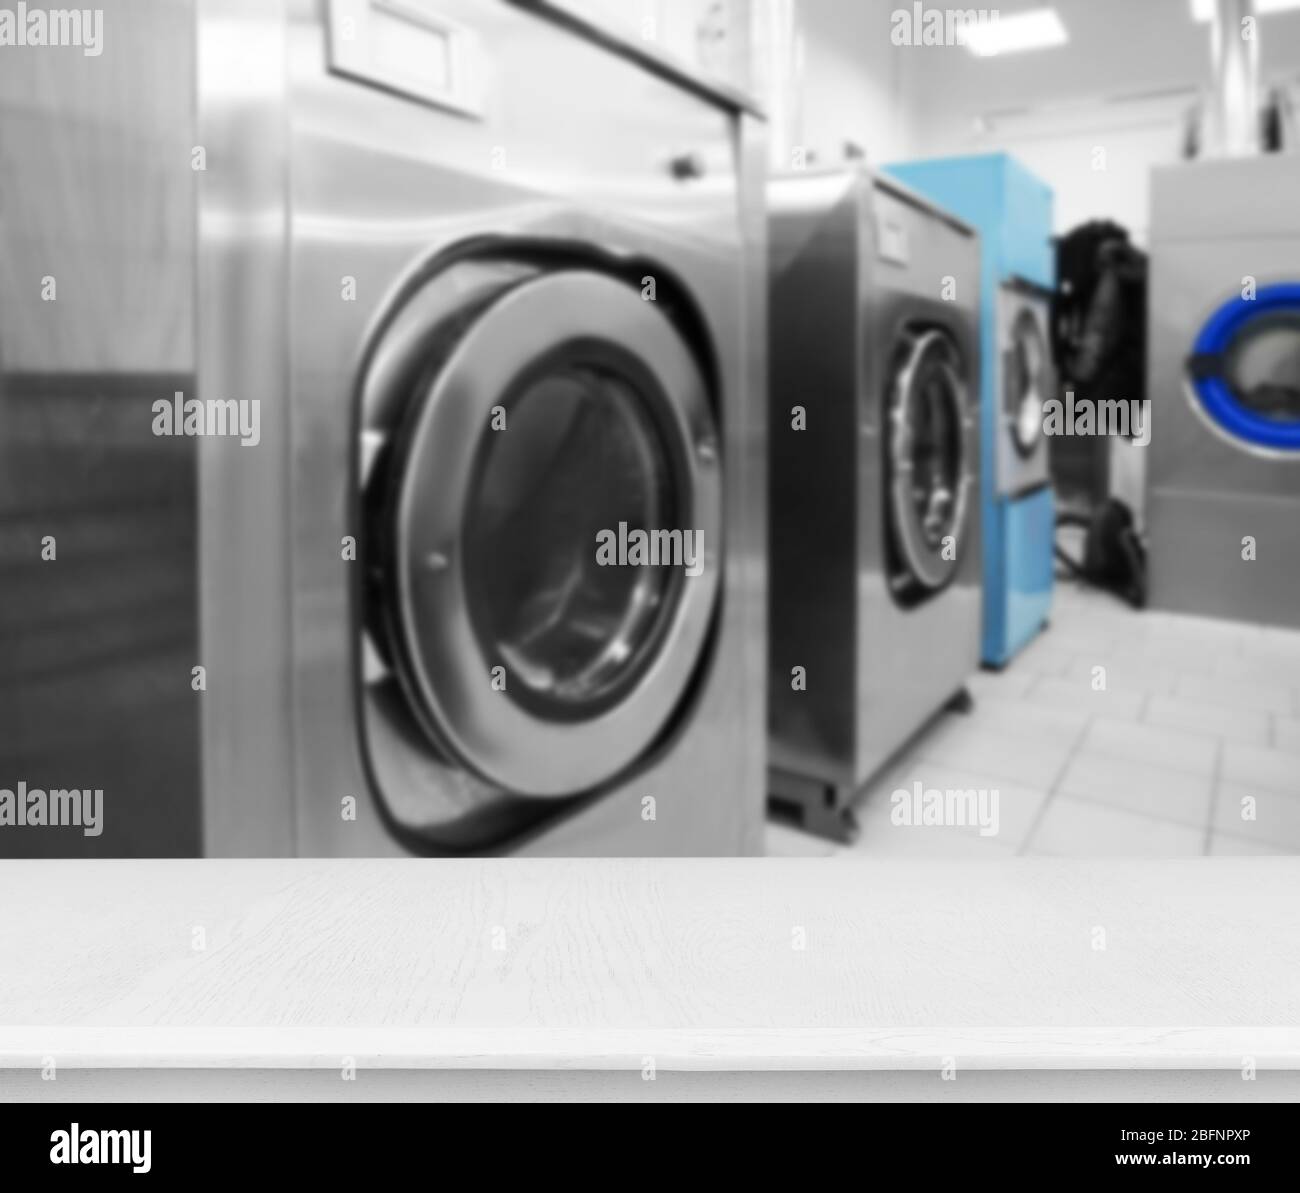 Table and washing machines at self-service laundry Stock Photo